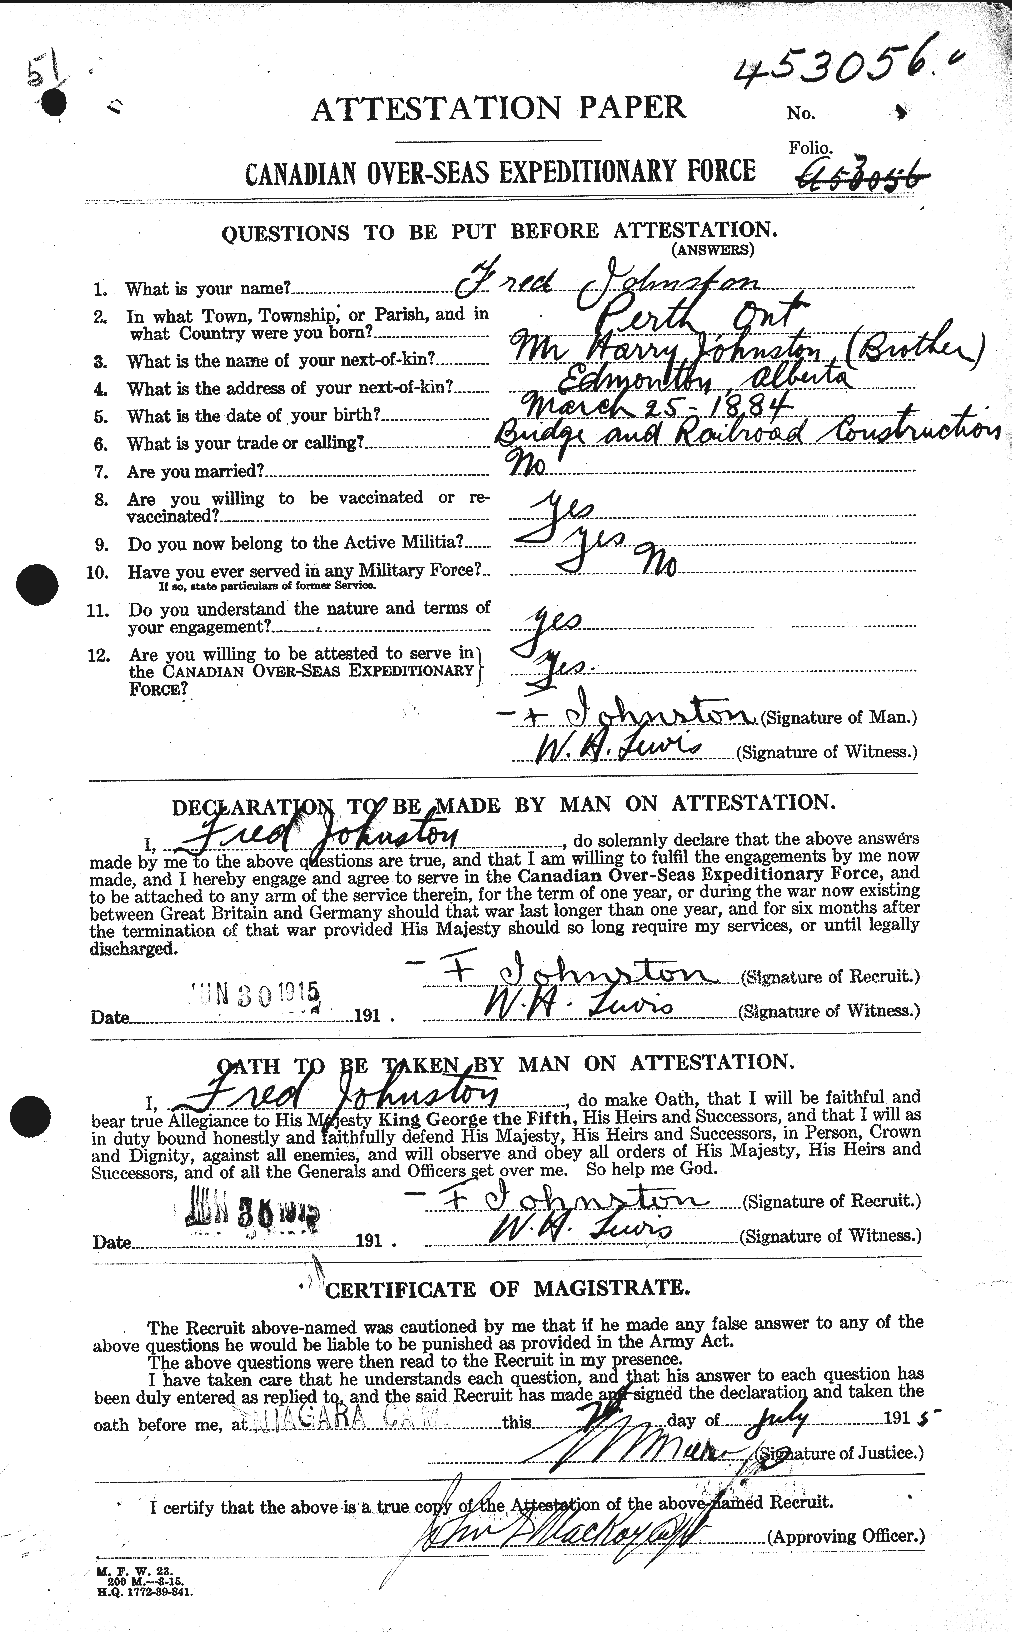 Personnel Records of the First World War - CEF 423285a